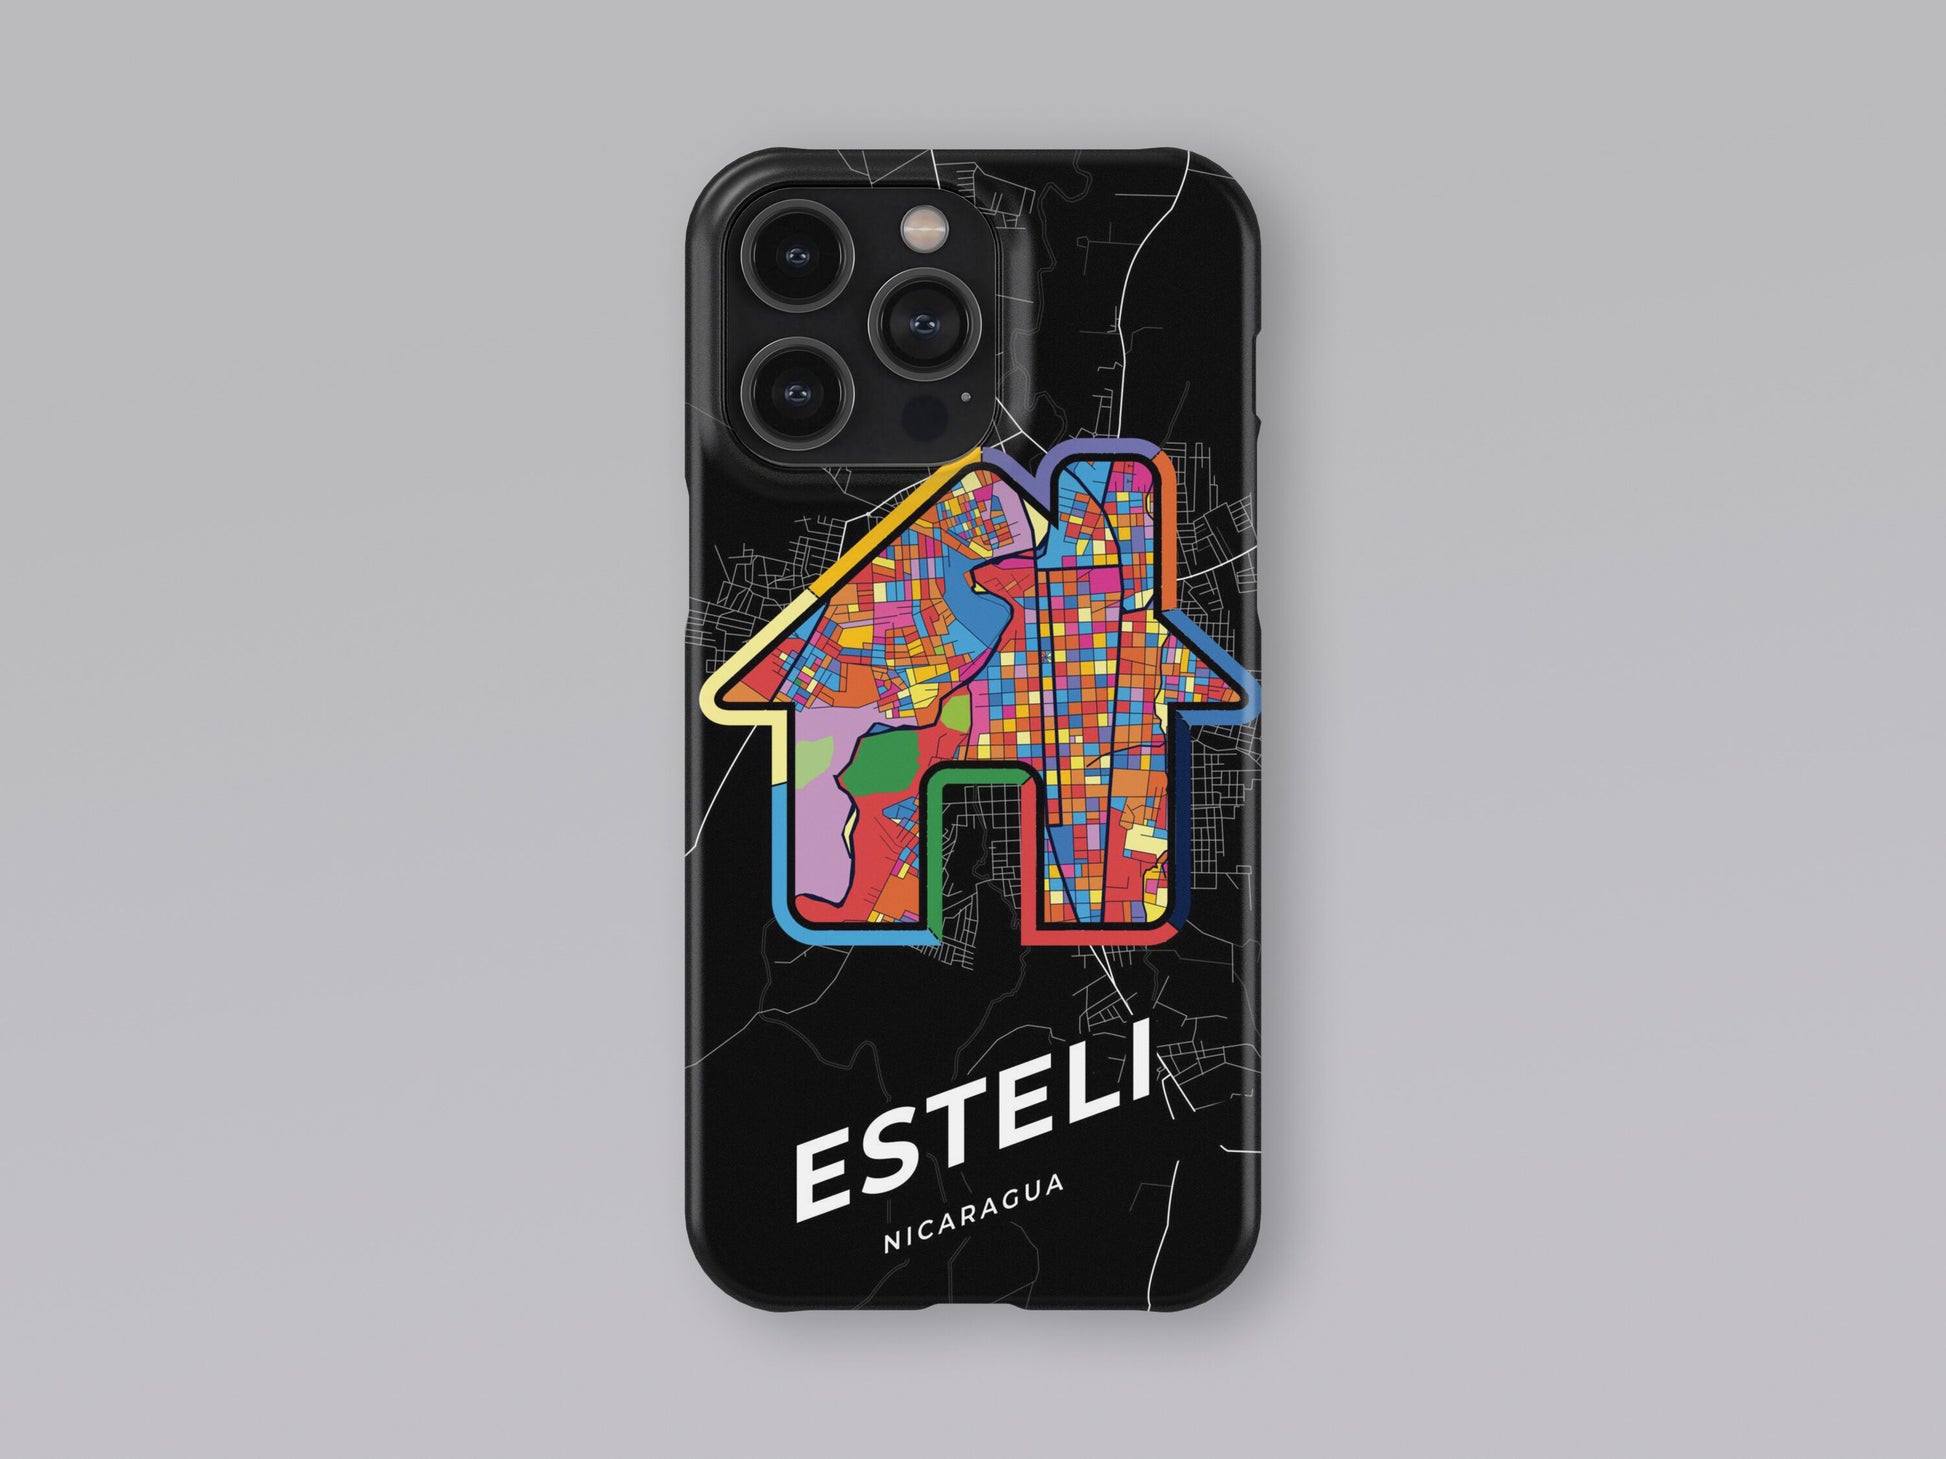 Esteli Nicaragua slim phone case with colorful icon. Birthday, wedding or housewarming gift. Couple match cases. 3